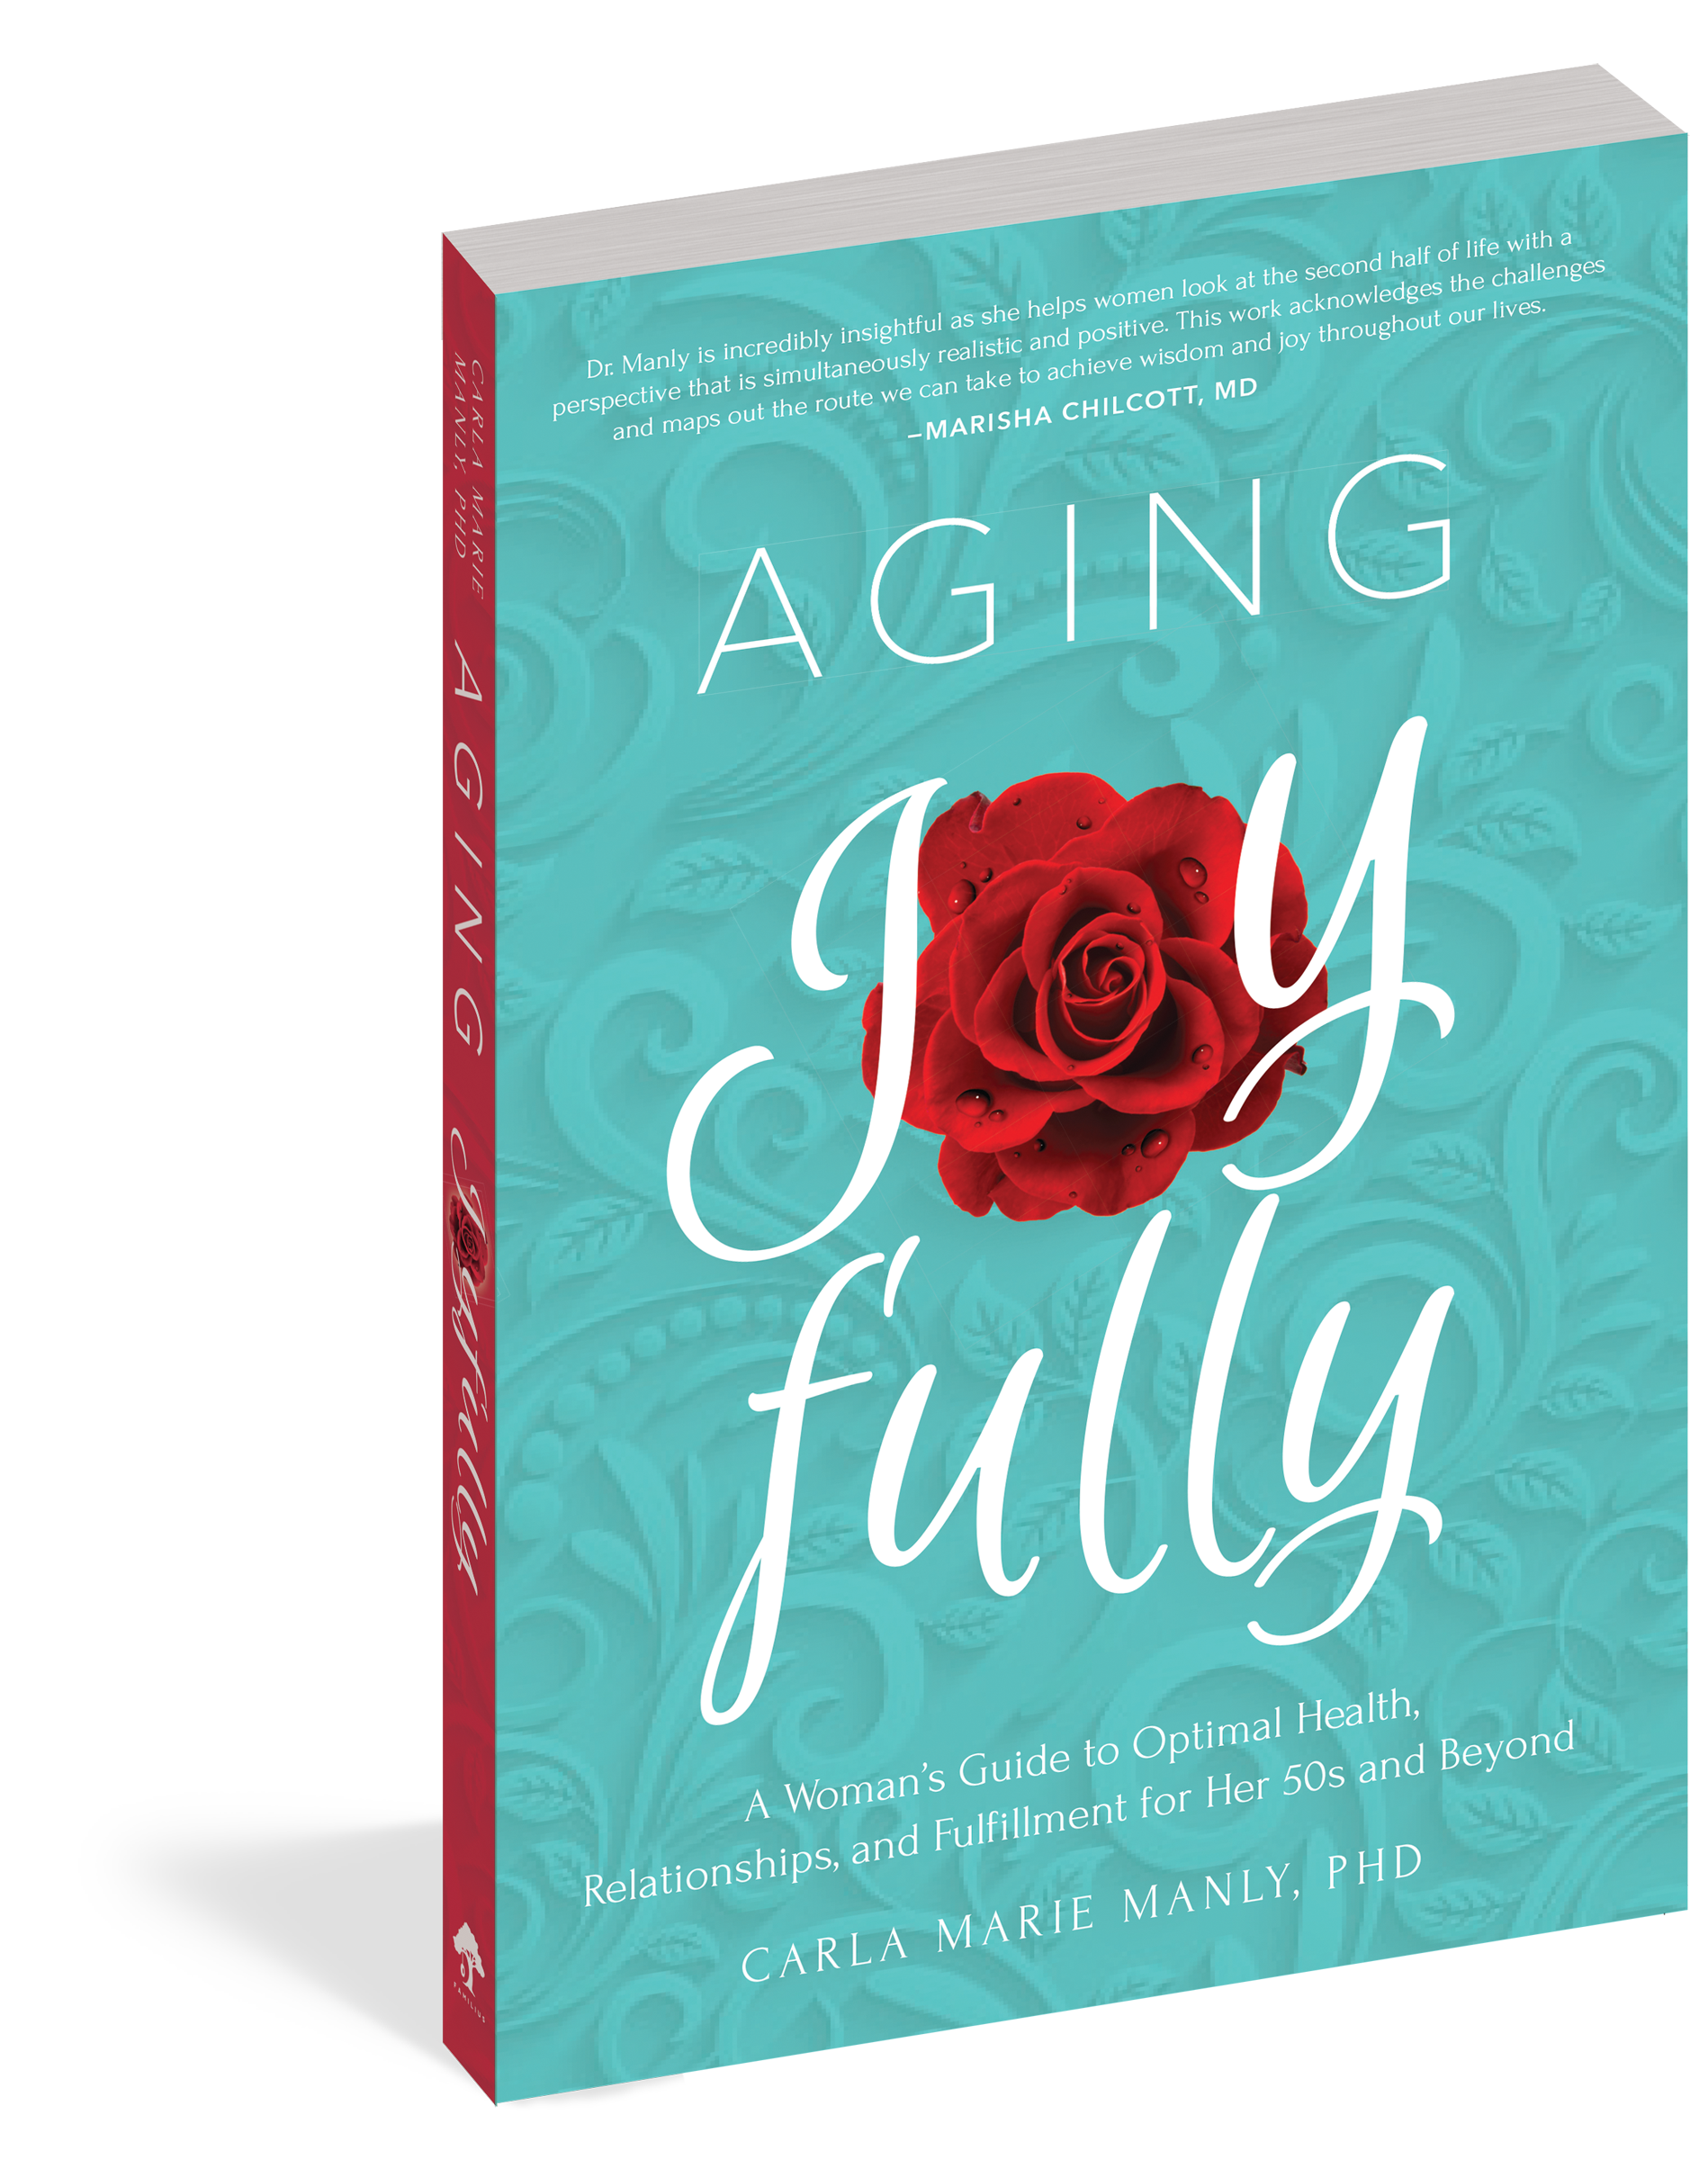 The cover of the book Aging Joyfully.